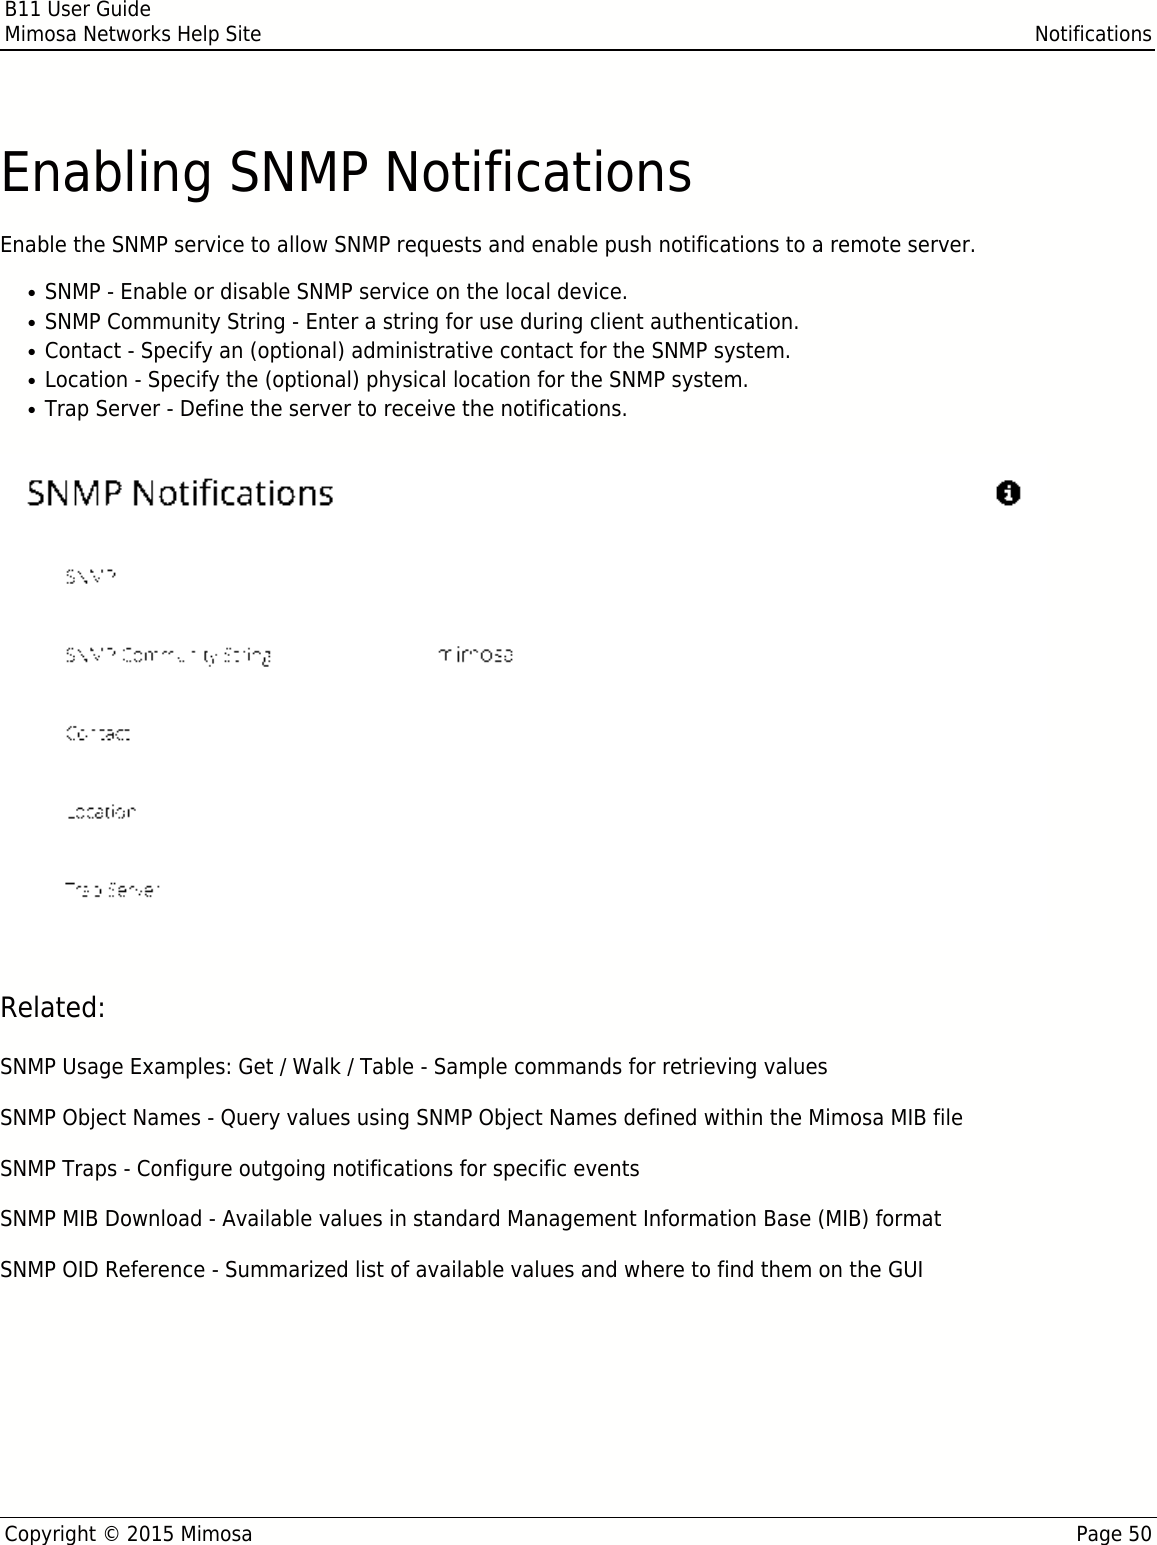 B11 User GuideMimosa Networks Help Site NotificationsCopyright © 2015 Mimosa Page 50Enabling SNMP NotificationsEnable the SNMP service to allow SNMP requests and enable push notifications to a remote server.SNMP - Enable or disable SNMP service on the local device.●SNMP Community String - Enter a string for use during client authentication.●Contact - Specify an (optional) administrative contact for the SNMP system.●Location - Specify the (optional) physical location for the SNMP system.●Trap Server - Define the server to receive the notifications.●Related:SNMP Usage Examples: Get / Walk / Table - Sample commands for retrieving valuesSNMP Object Names - Query values using SNMP Object Names defined within the Mimosa MIB fileSNMP Traps - Configure outgoing notifications for specific eventsSNMP MIB Download - Available values in standard Management Information Base (MIB) formatSNMP OID Reference - Summarized list of available values and where to find them on the GUI